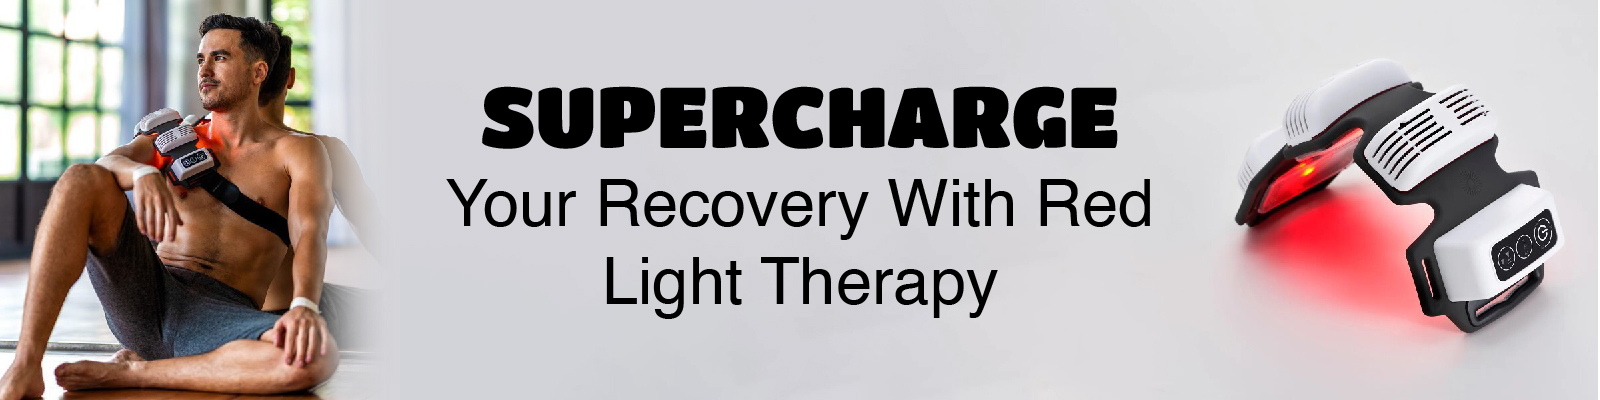 Supercharge your recovery with the FlexBeam